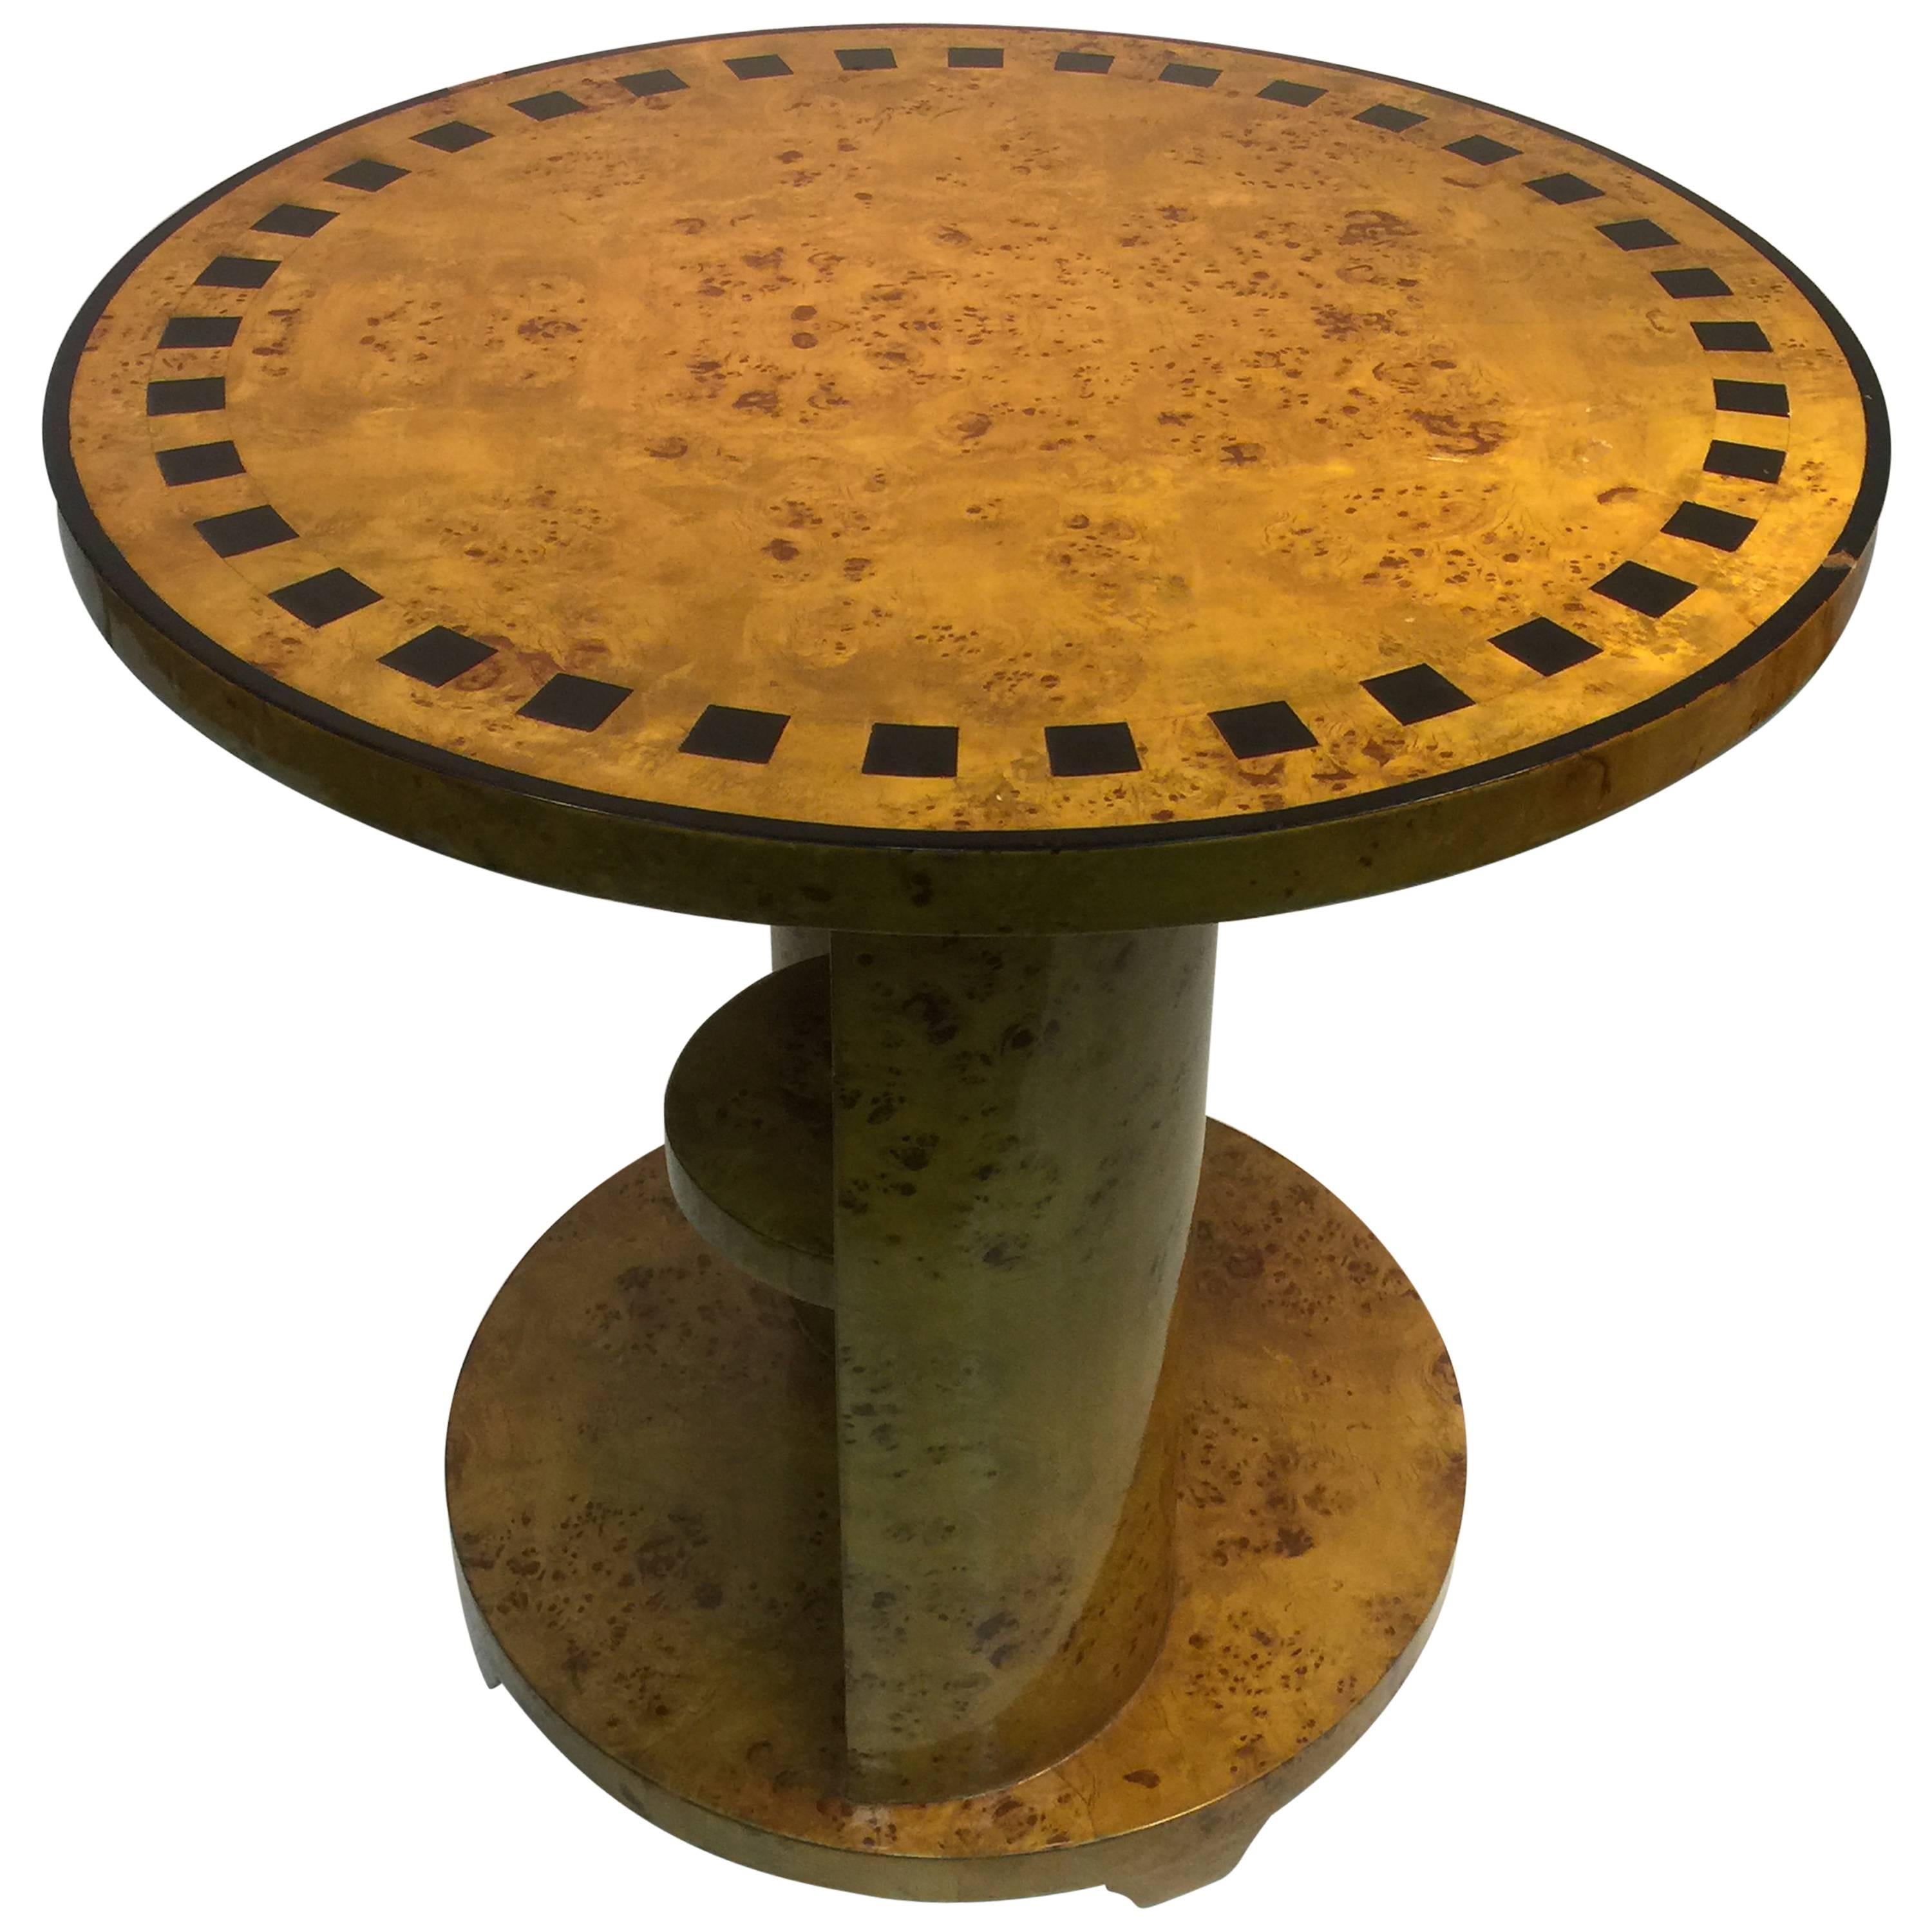 French Art Deco Inlaid Burl Wood Center Table or Pedestal with Great Detail For Sale